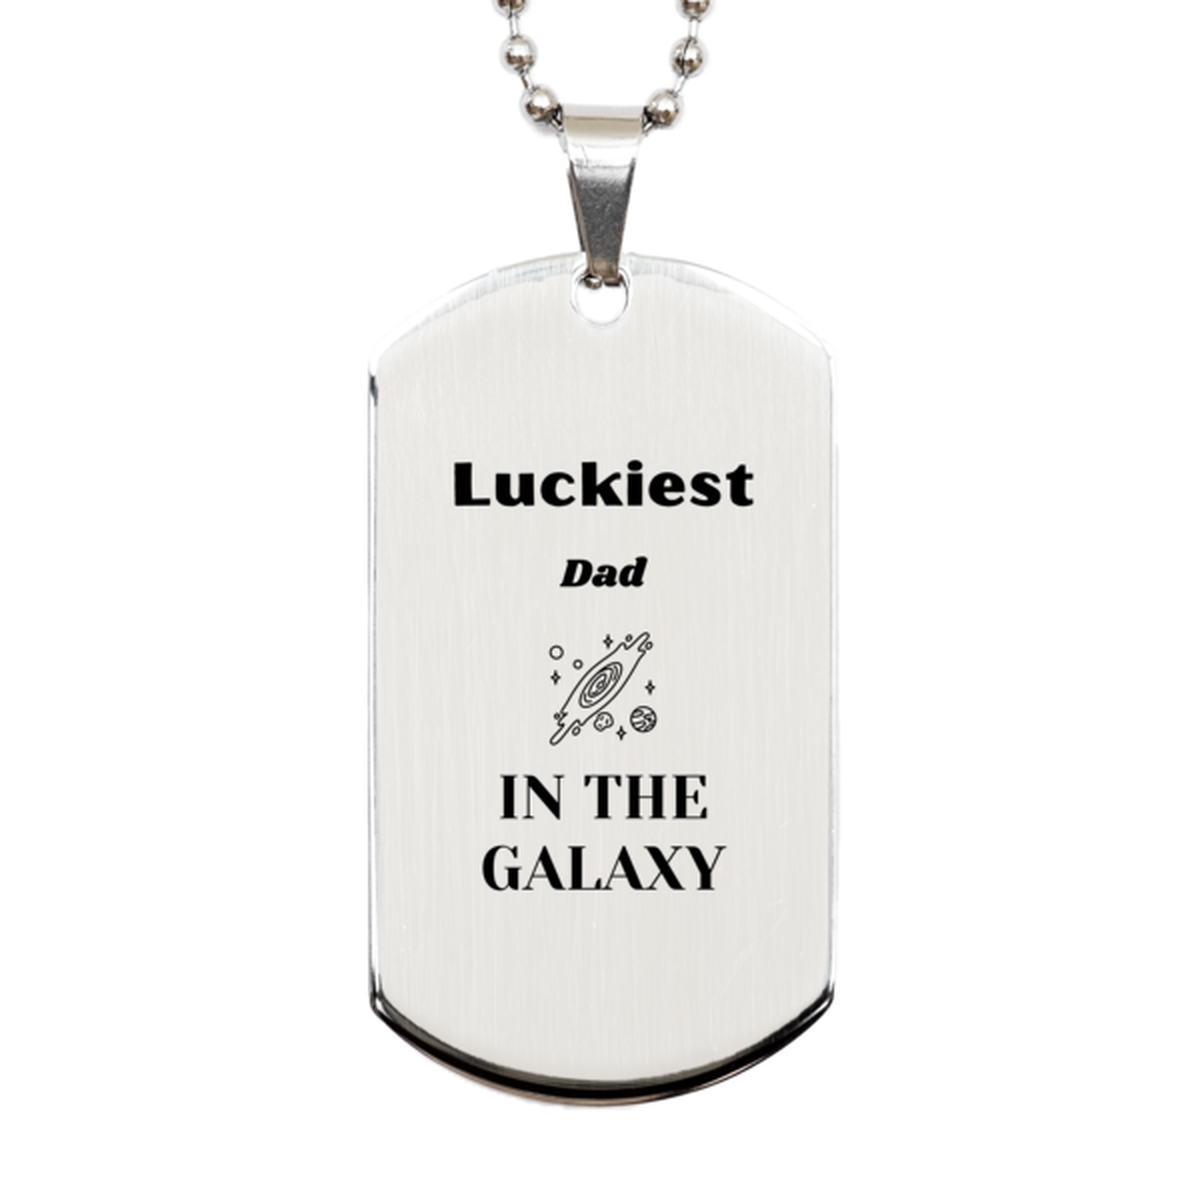 Luckiest Dad in the Galaxy, To My Dad Engraved Gifts, Christmas Dad Silver Dog Tag Gifts, X-mas Birthday Unique Gifts For Dad Men Women